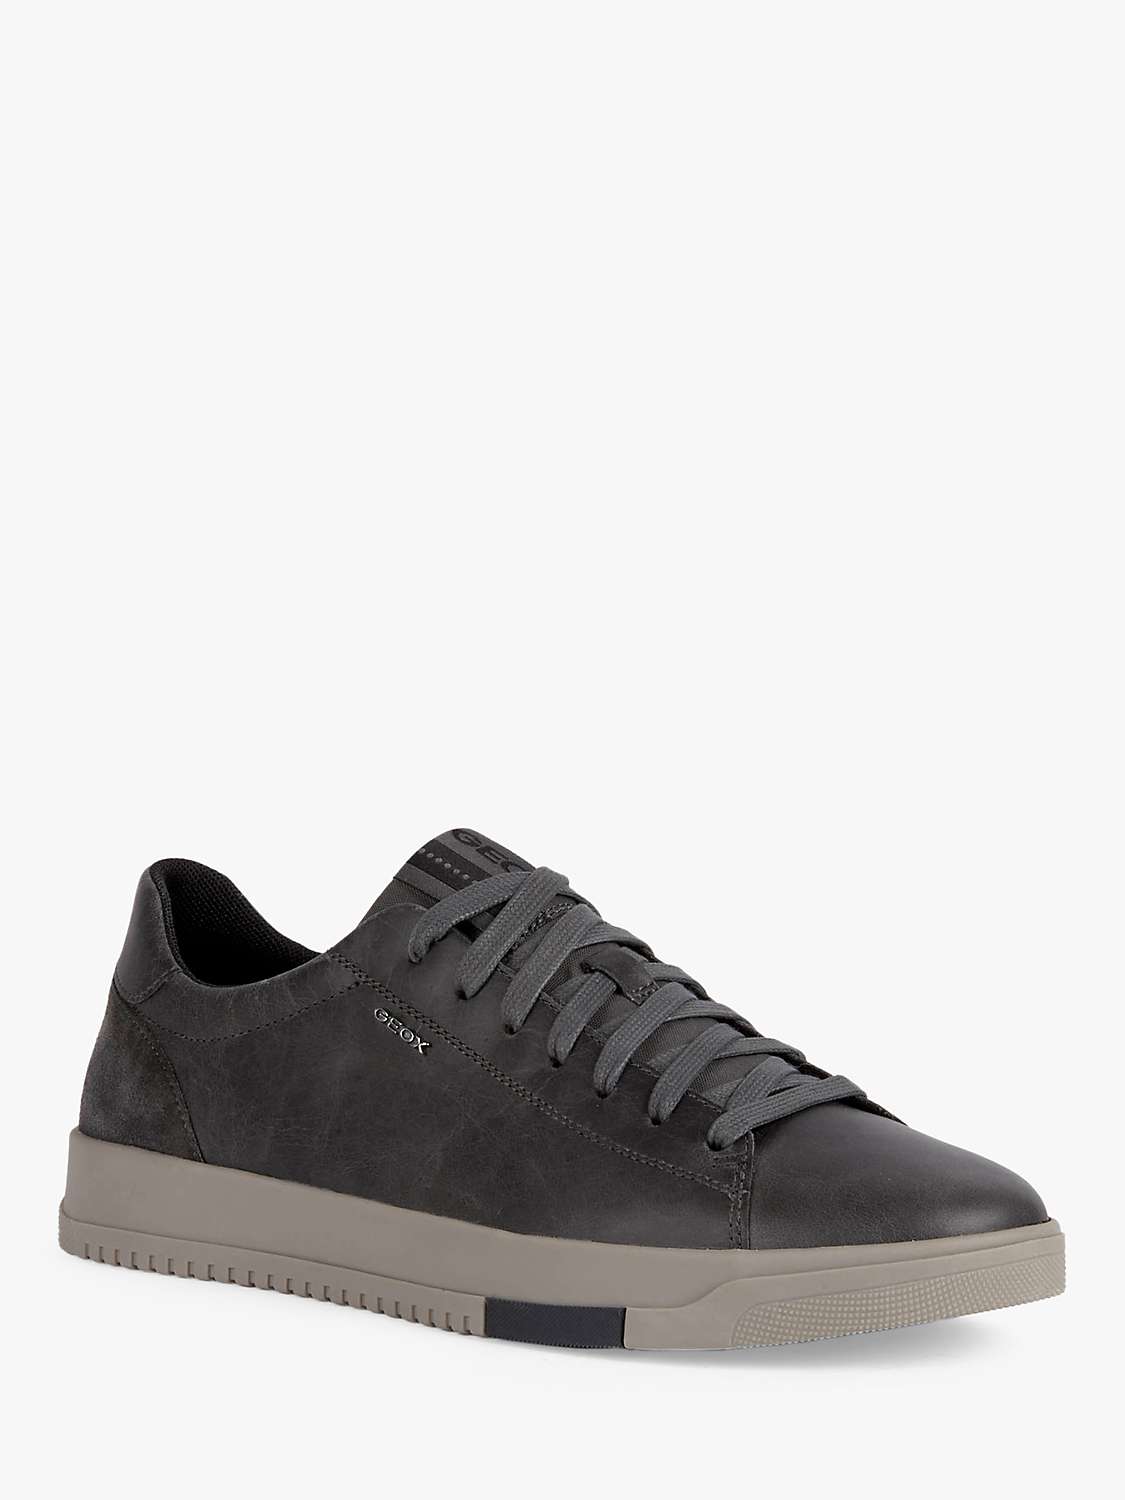 Buy Geox Segnale Leather Trainers Online at johnlewis.com